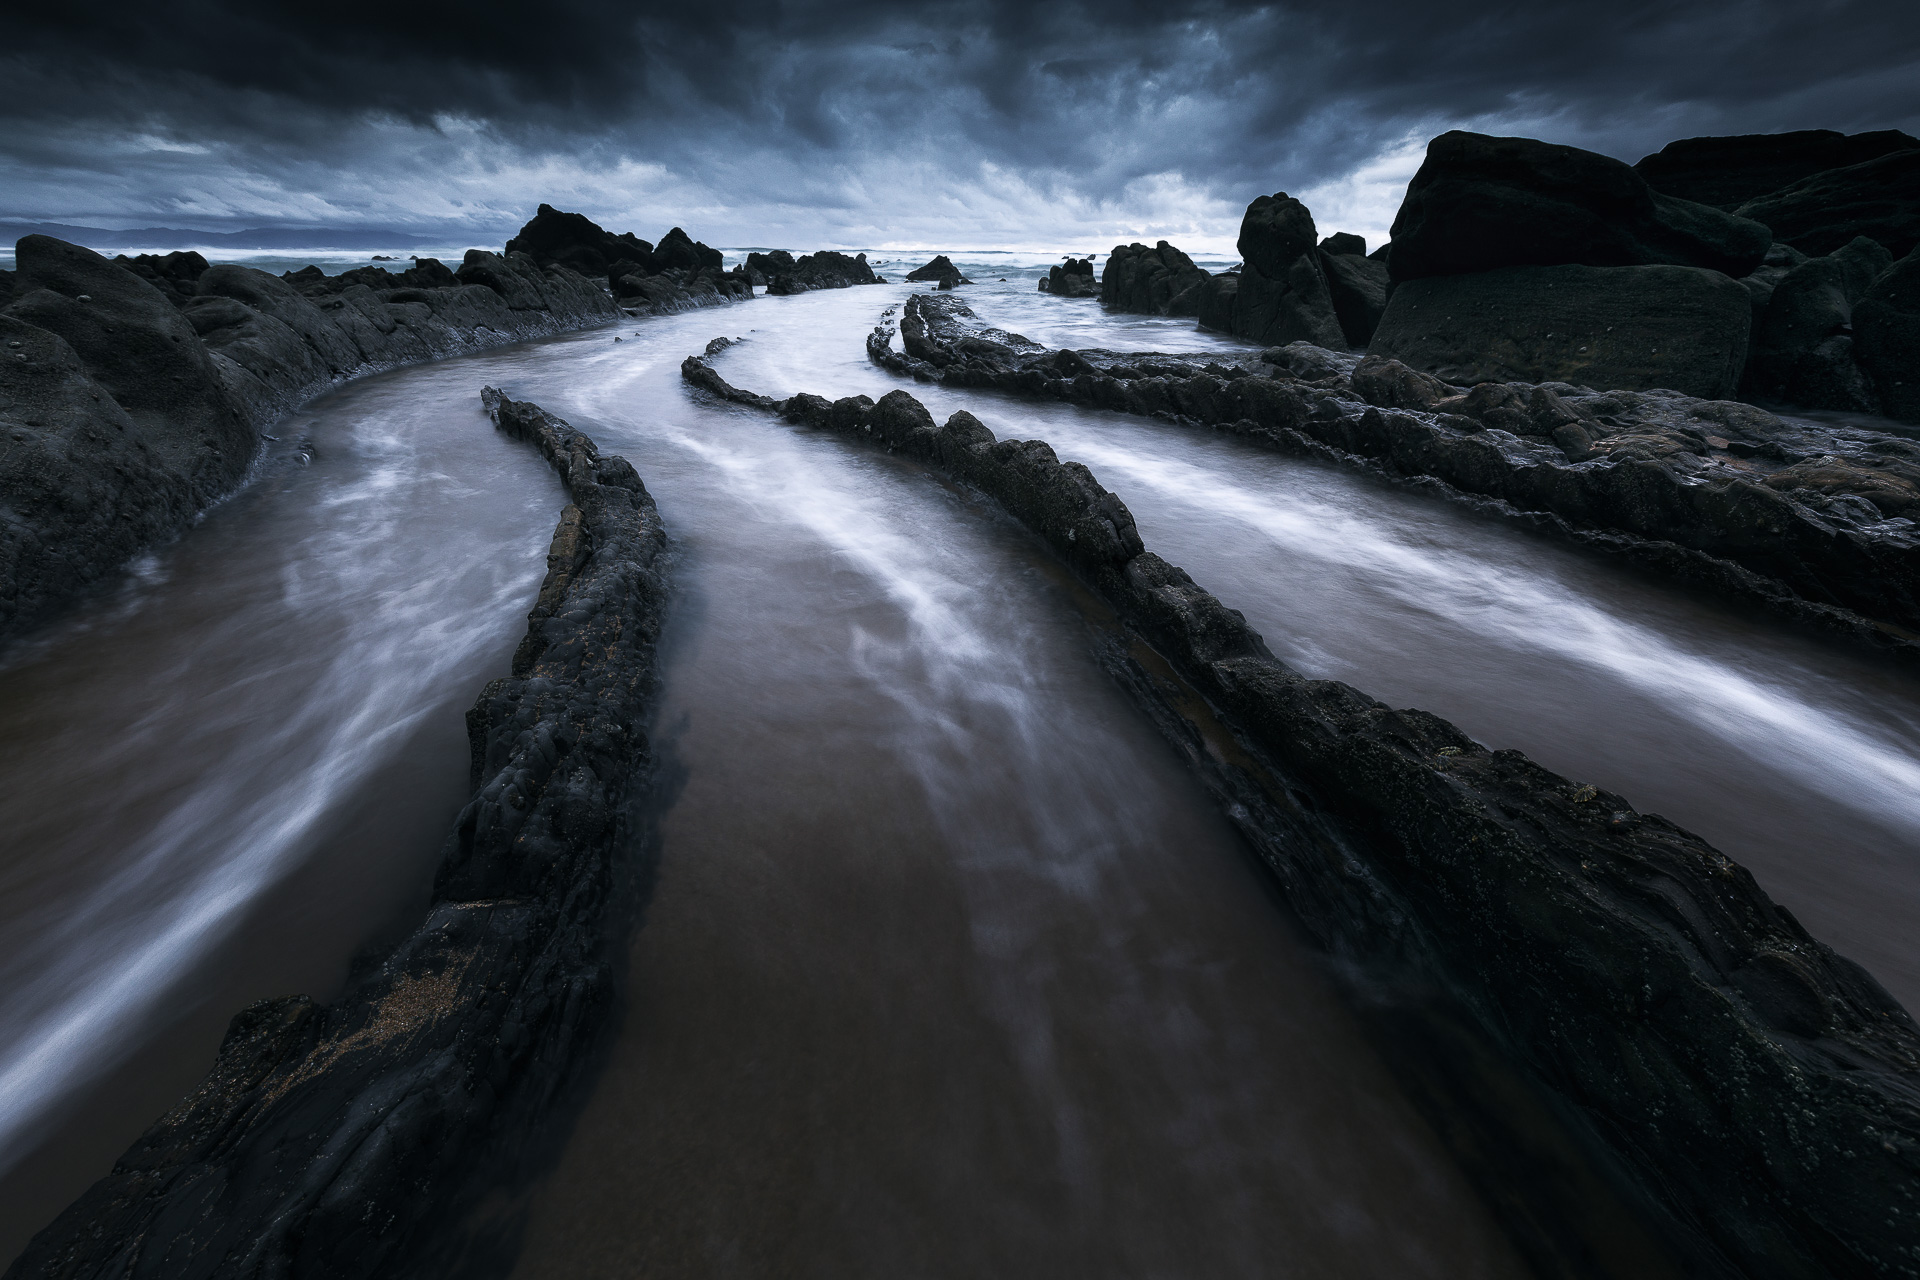 davidbouscarle leviathan photographie paysage theartcycle photo_principale.jpg The Art Cycle